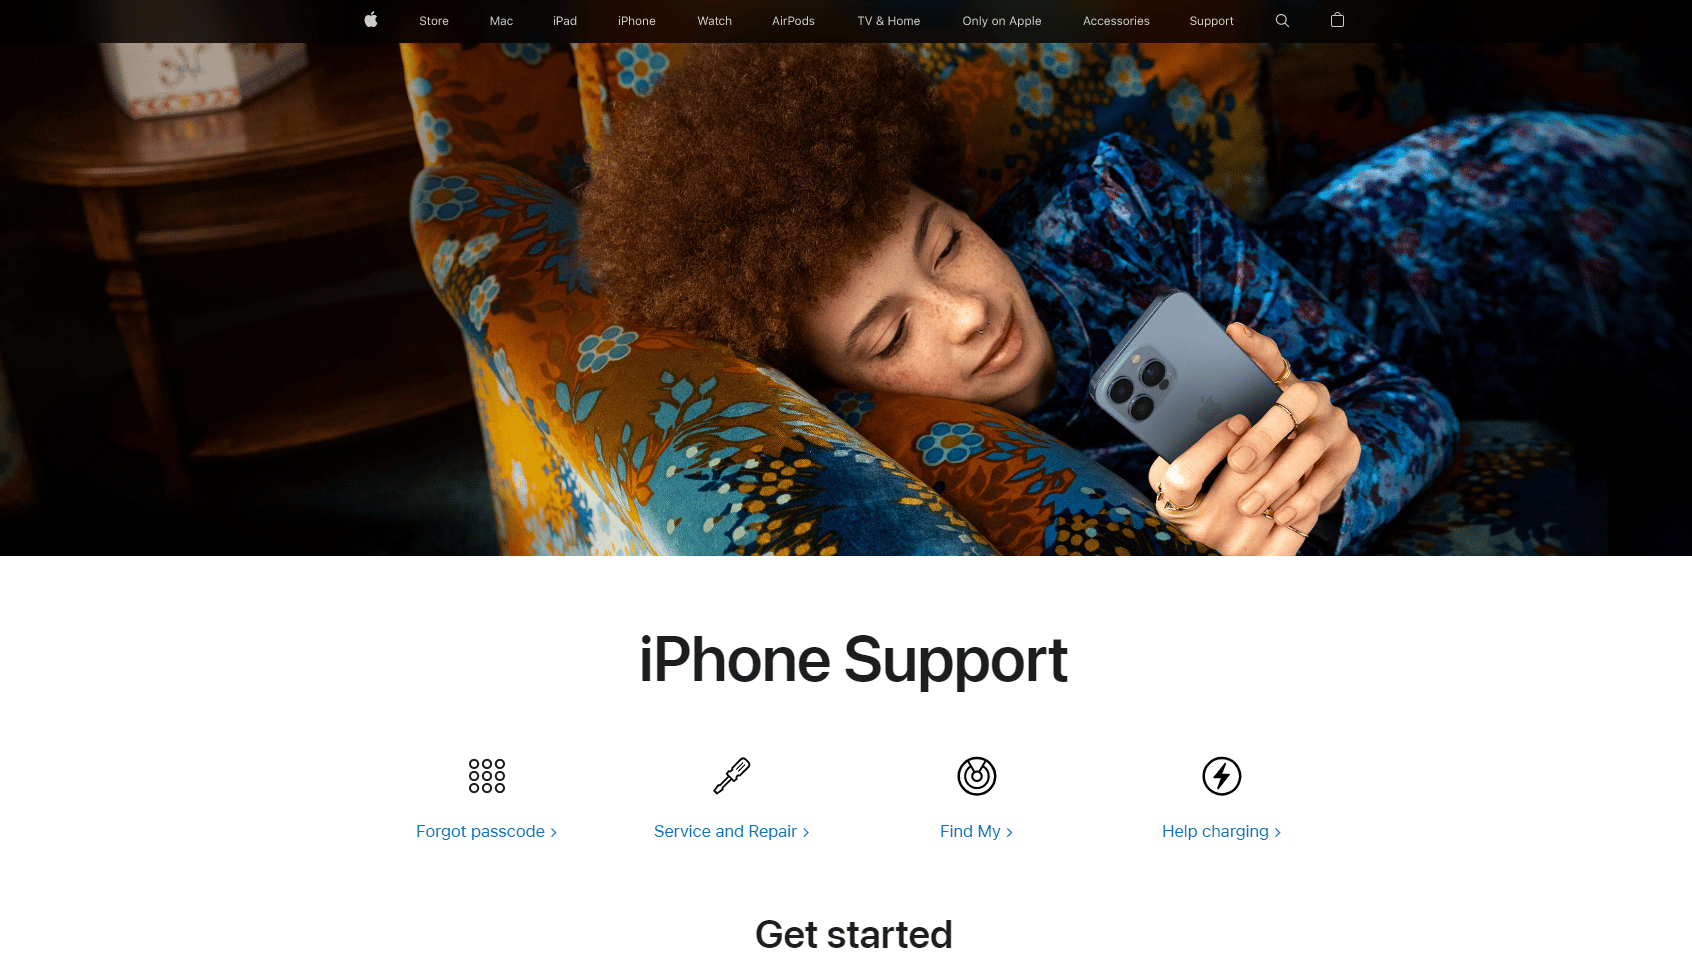 iPhone support page